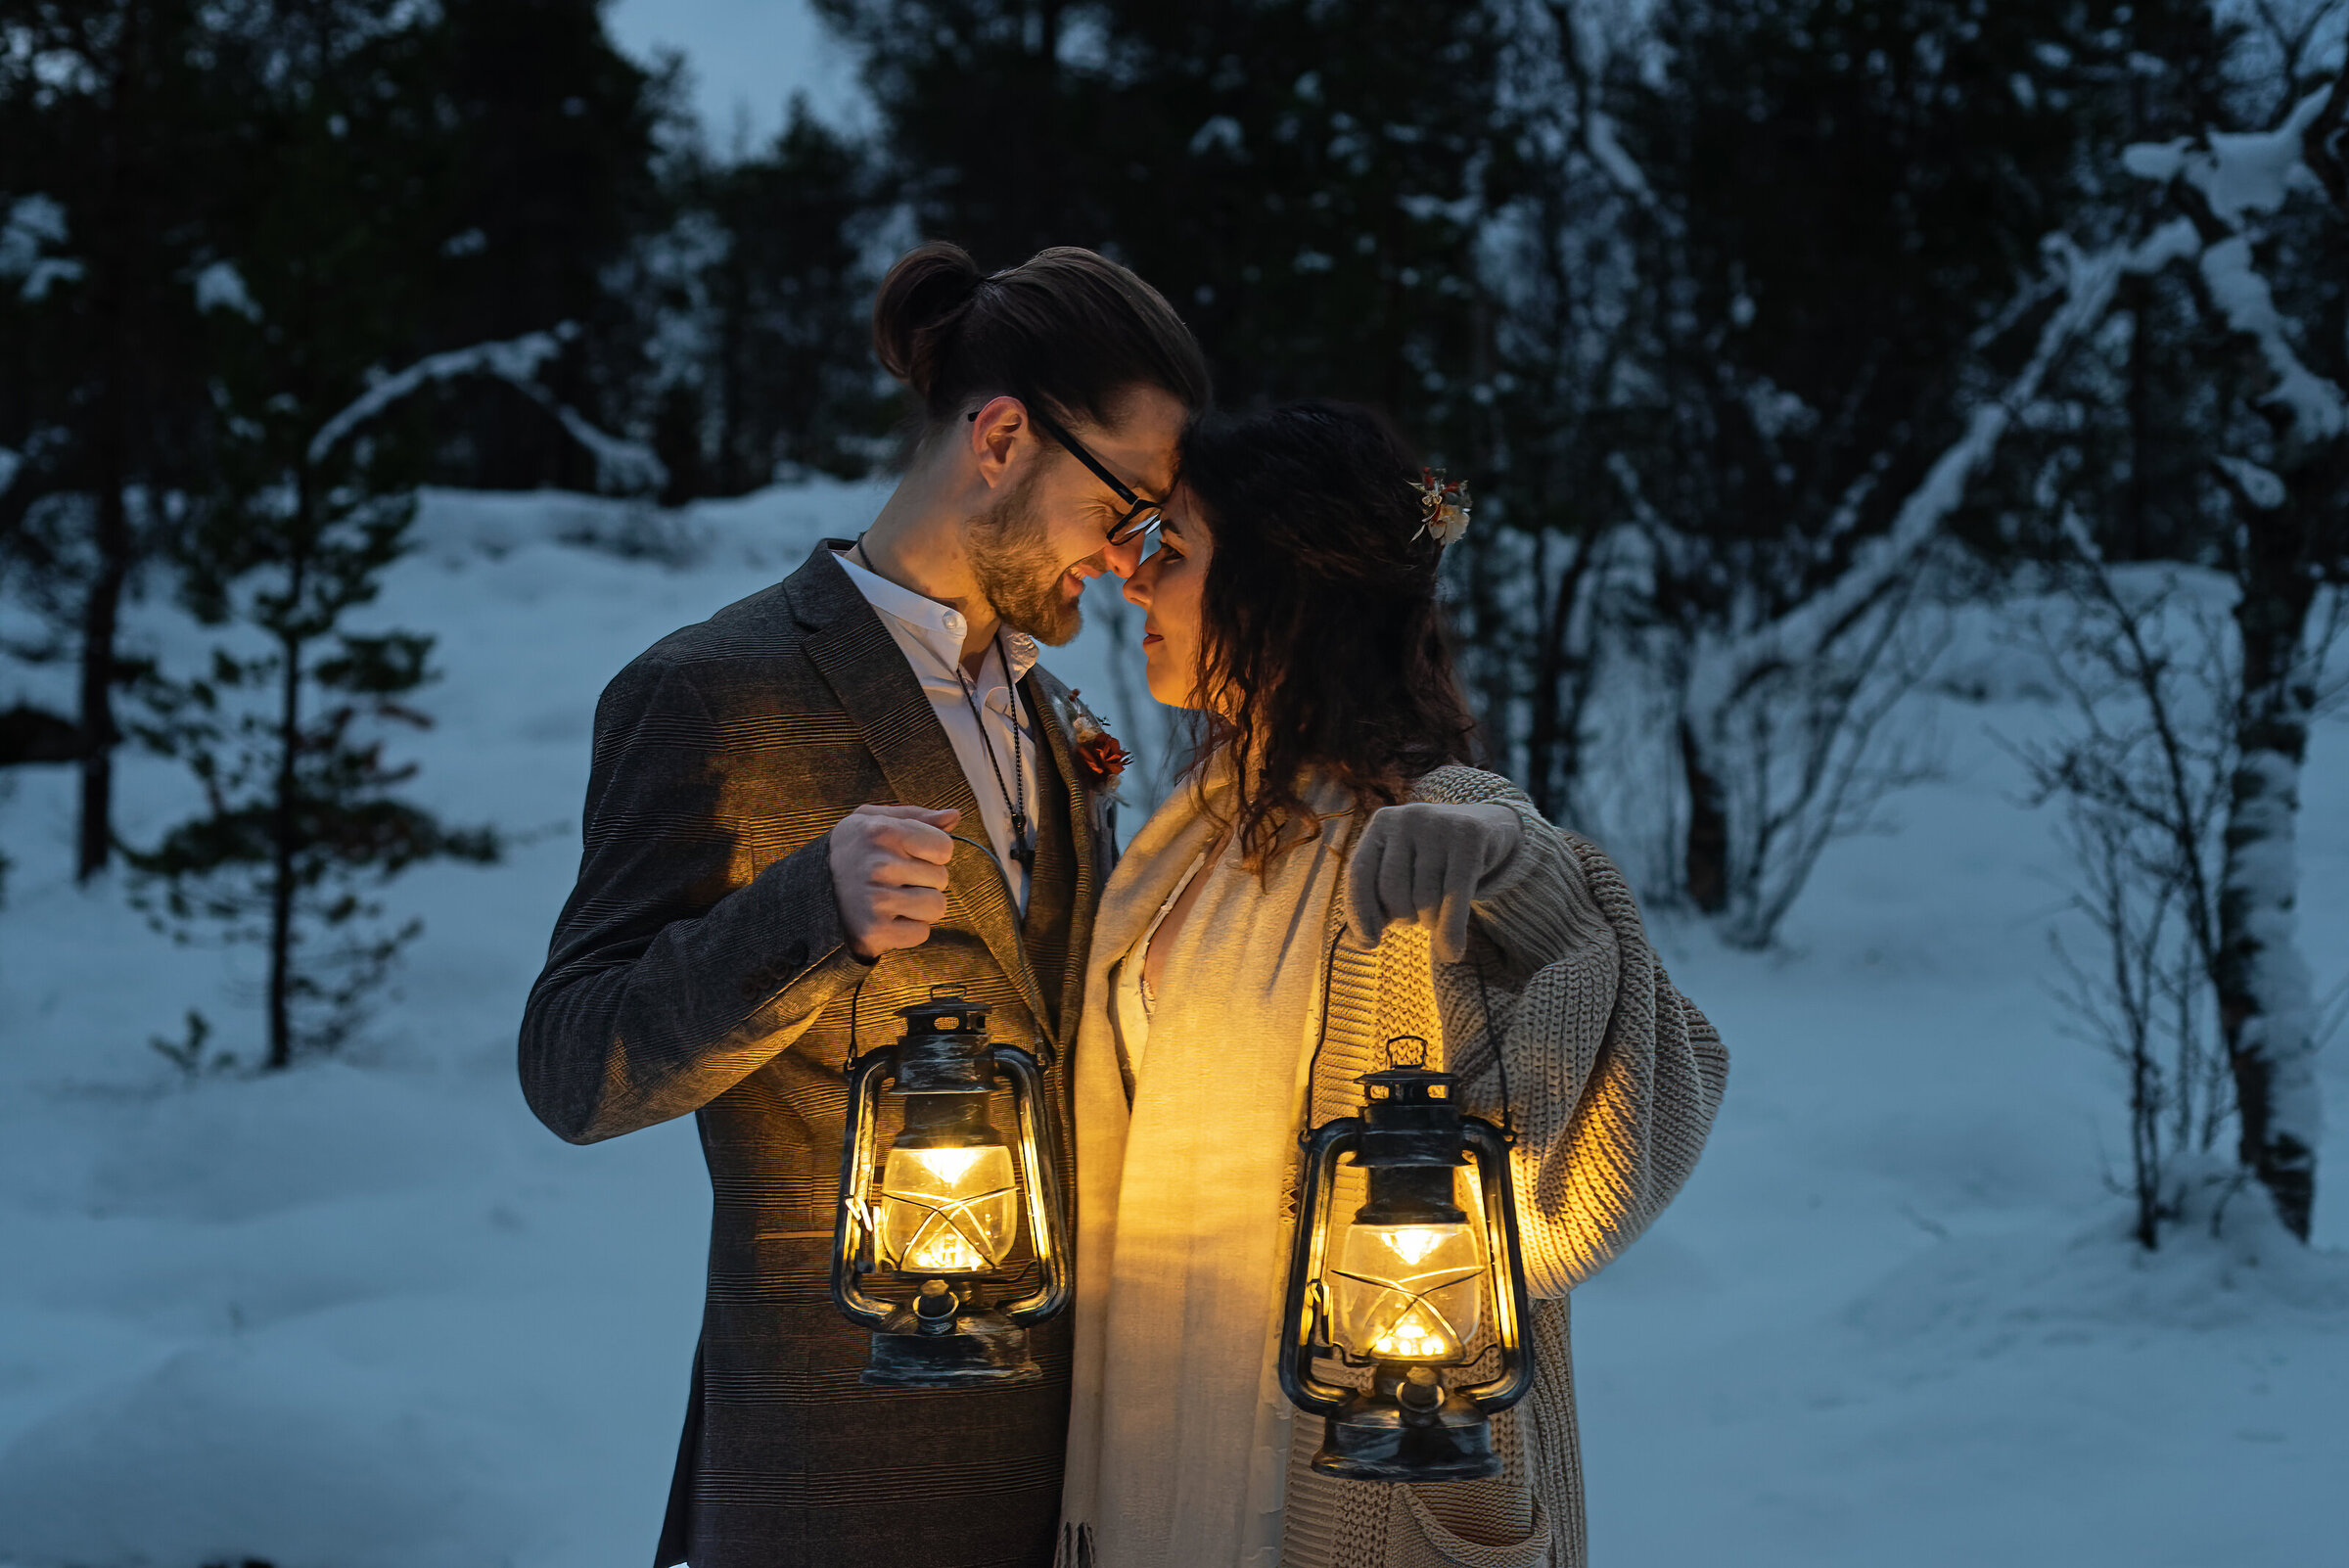 A romantic image of a couple who have just eloped in the Tromsø region, standing facing each other with foreheads together, in a snowy landscape during twilight. The man, wearing glasses and a stylish brown tweed suit, is holding a lit lantern in his right hand. The woman, adorned with small flowers in her hair and a cozy cream cardigan over a white boho wedding dress, is holding a similar lantern in her left hand. They are gazing affectionately into each other's eyes, sharing a warm moment in the cold environment.